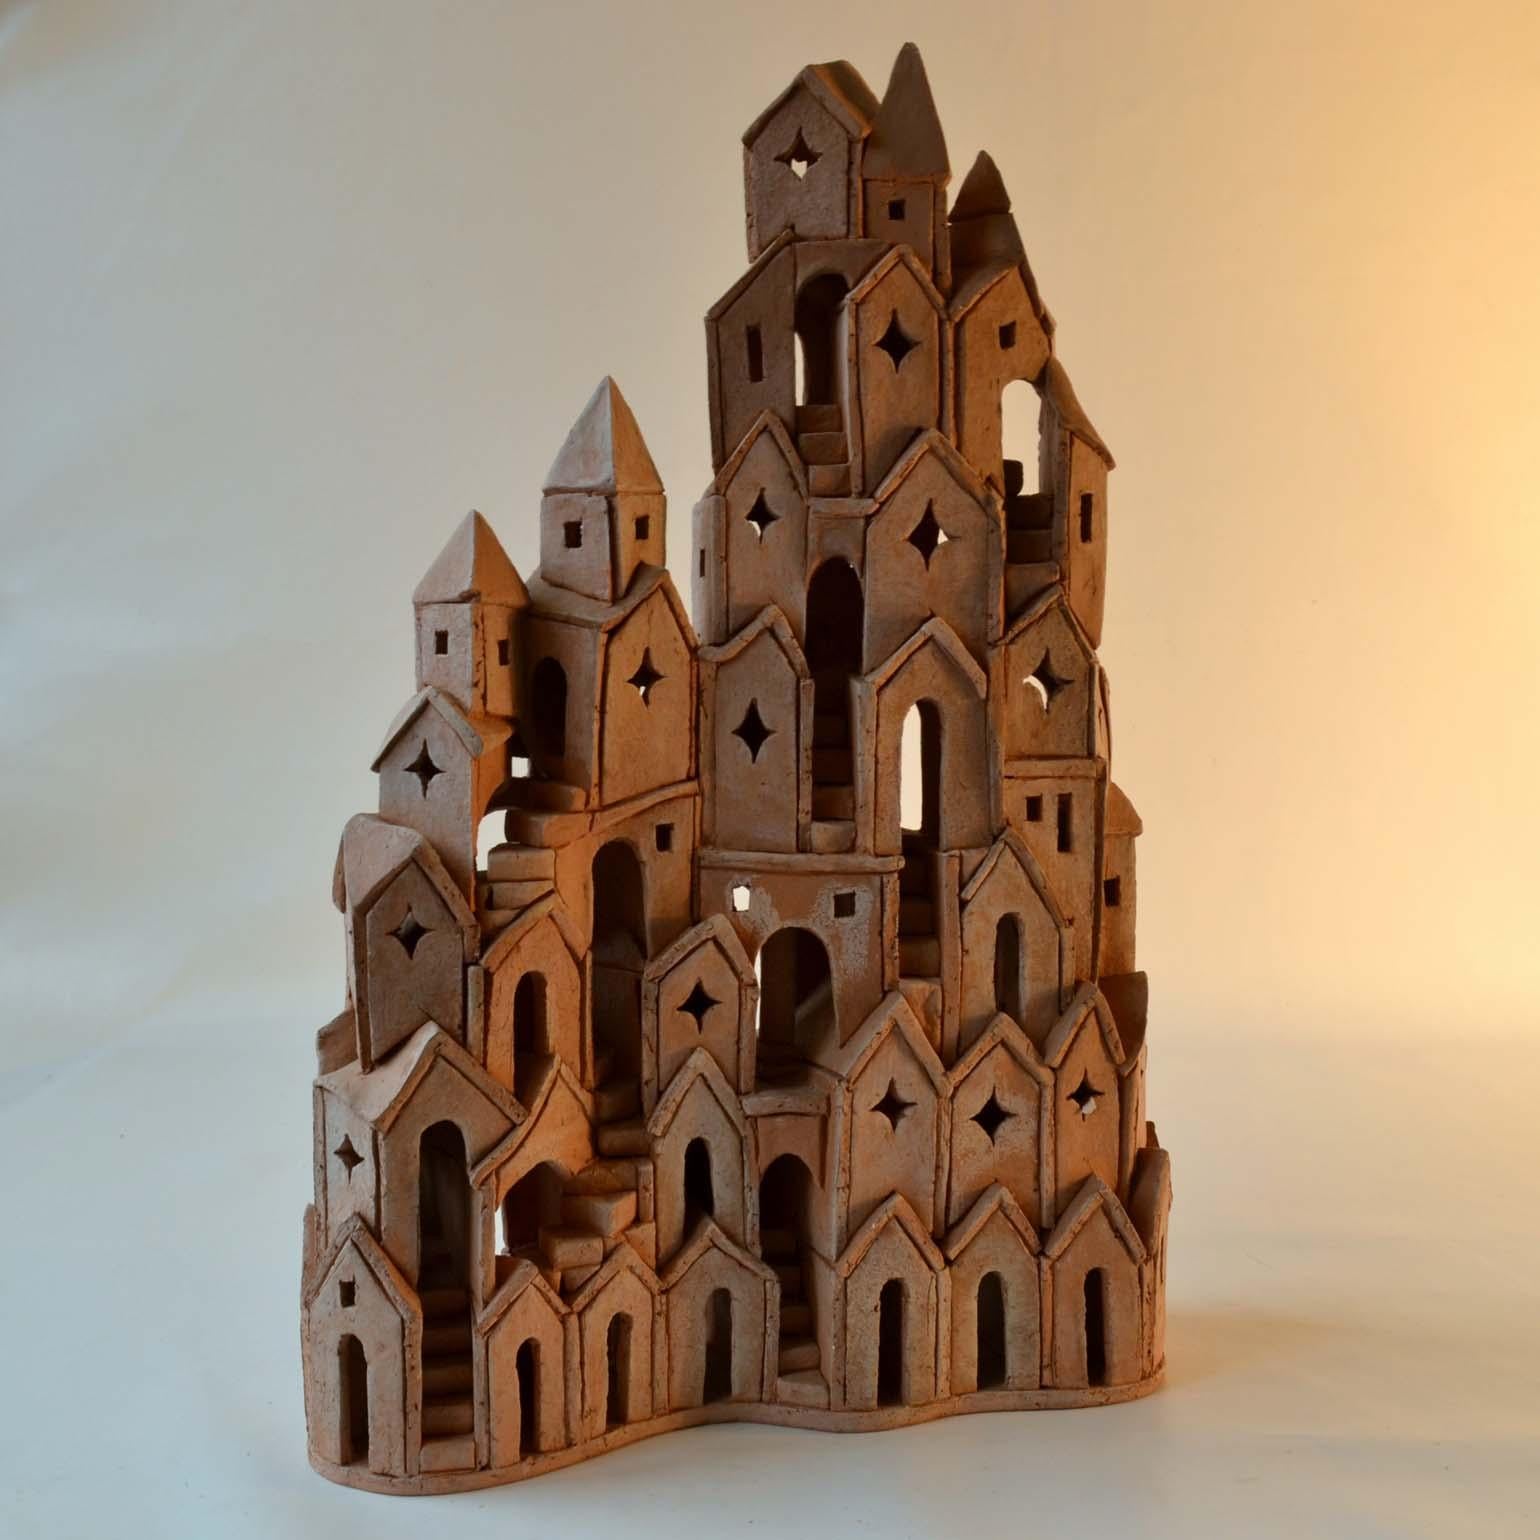 Tower build in red baking clay by Dutch artist Arie Bouter, Gouda 1995 (B. 1942) is based on medieval European architecture and has a strong resemblance with Mont St. Michel in France, the Tower of Babel but also refer to M. C. Escher's drawing